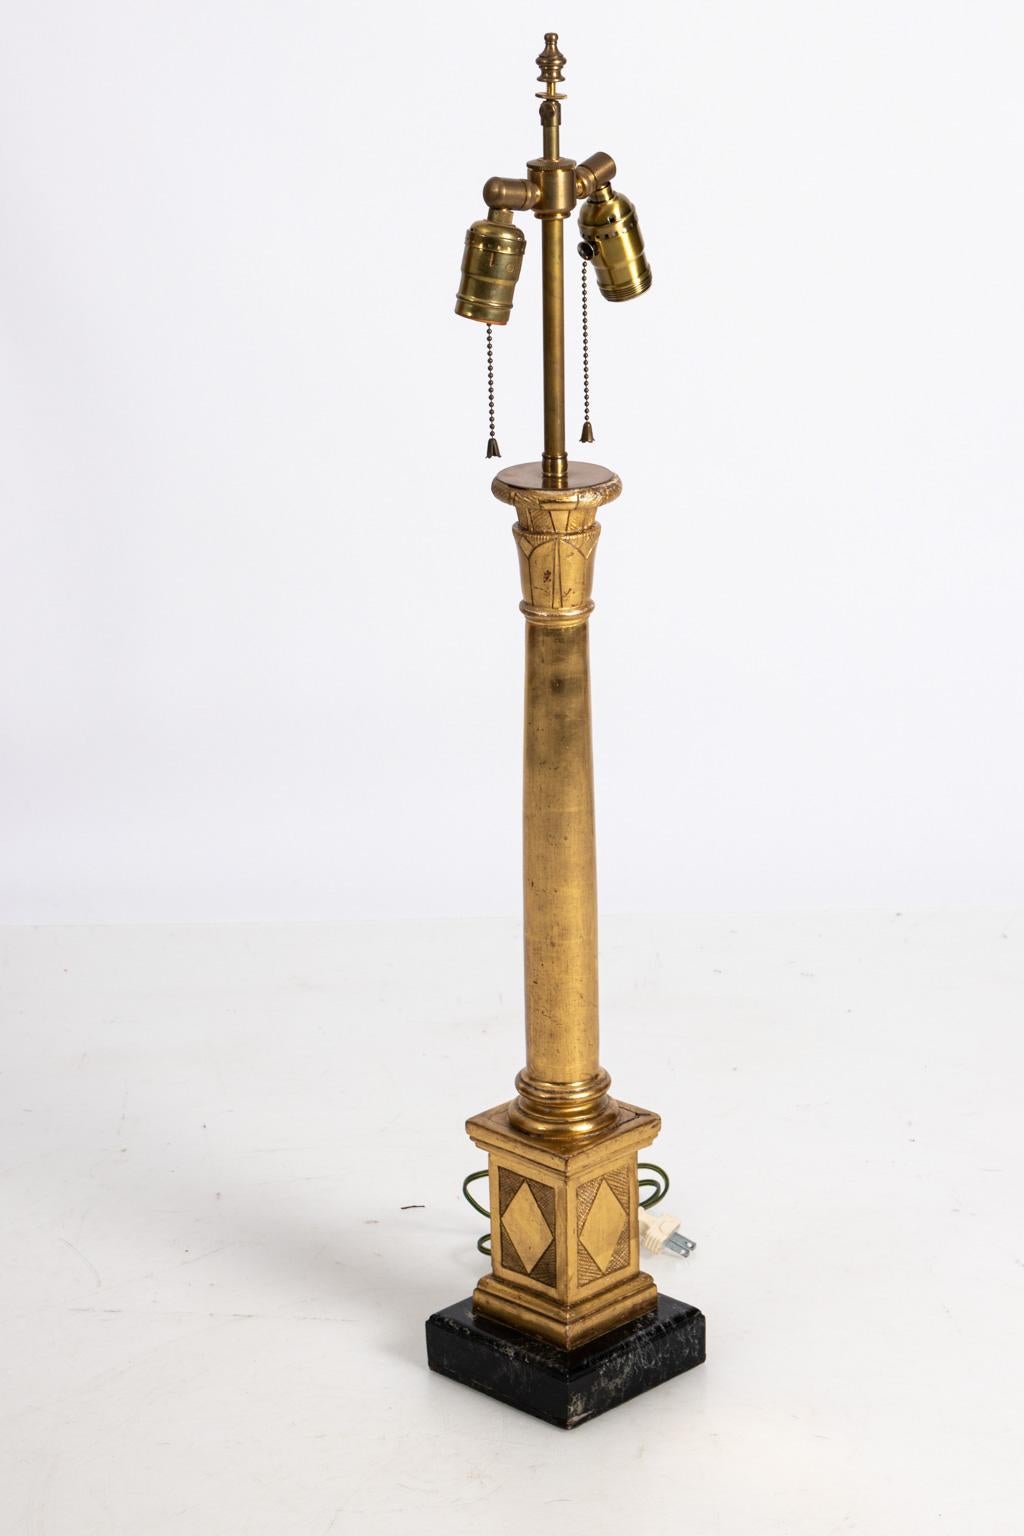 Gilded column lamp on faux marble base, circa 1920s. Please note of wear consistent with age including minor wear to gilding along with small chips and cracks at joints but structurally sound. Shade not included. Made in Italy.